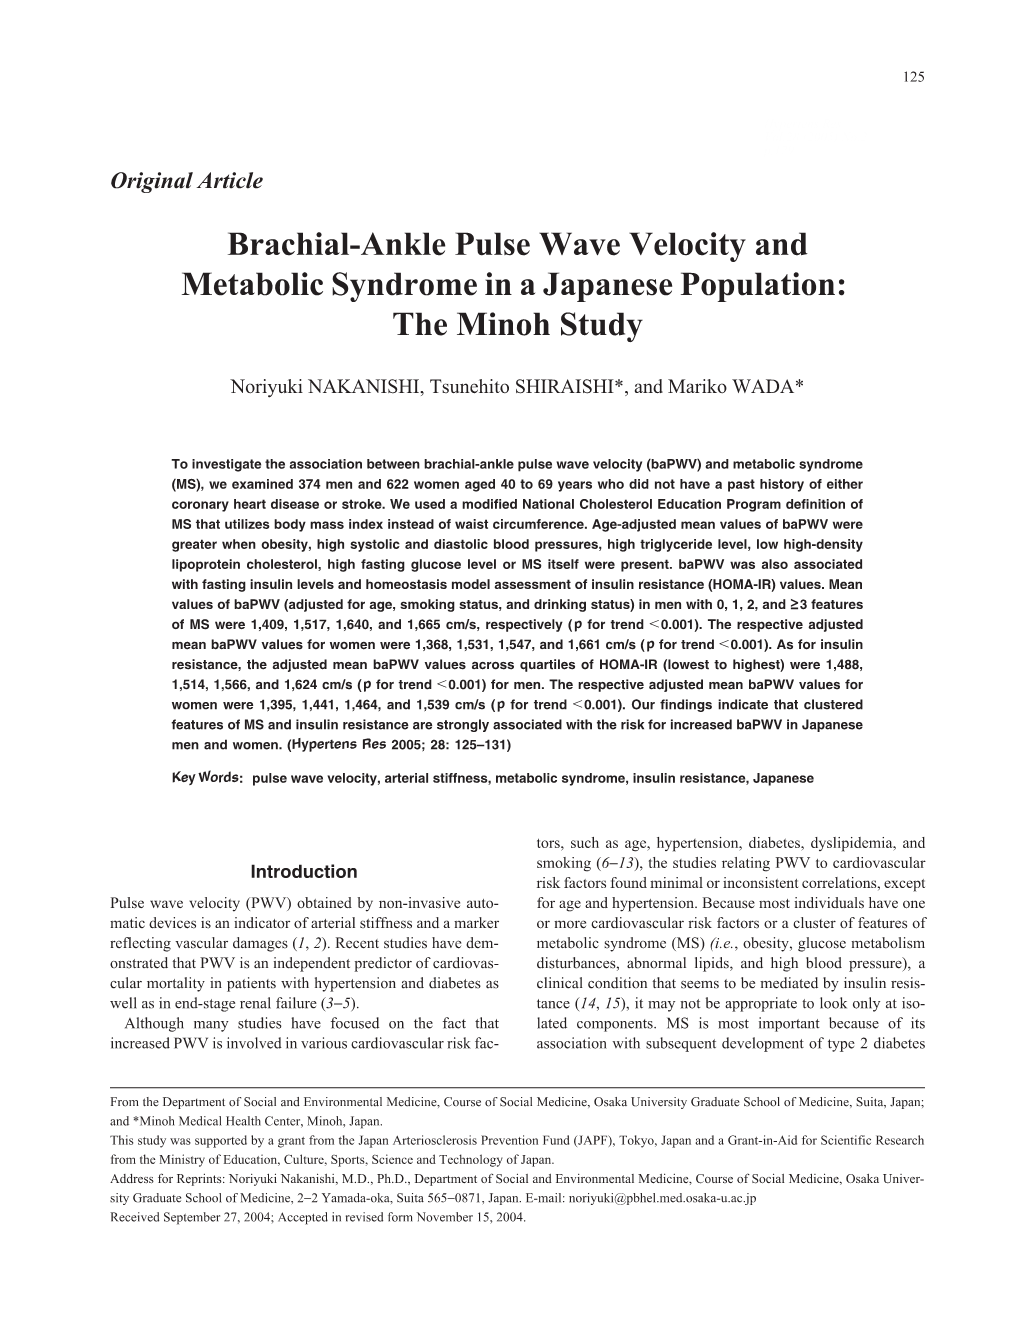 Brachial-Ankle Pulse Wave Velocity and Metabolic Syndrome in a Japanese Population: the Minoh Study